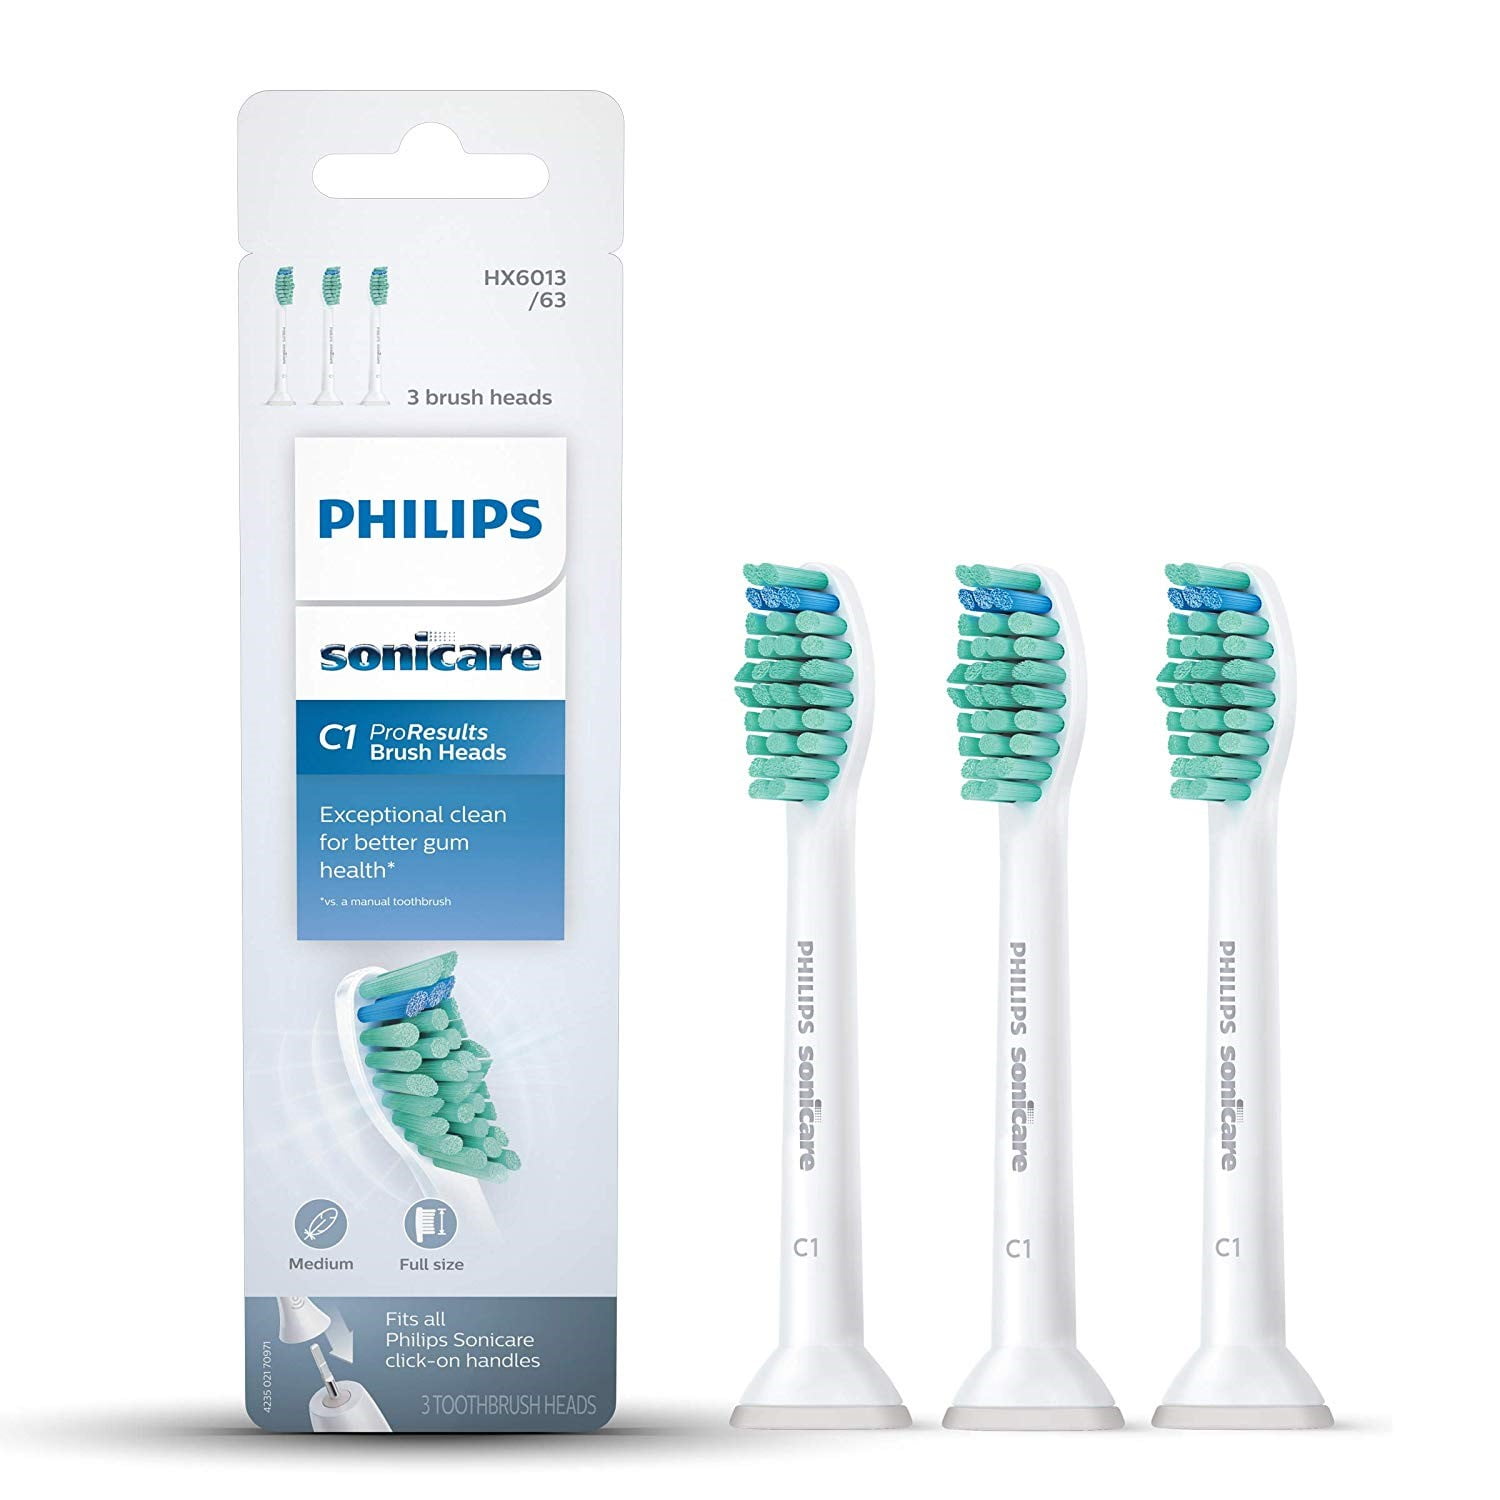 Philips Sonicare ProtectiveClean 4300 Rechargeable Toothbrush, 2 pk. - (pink/black)